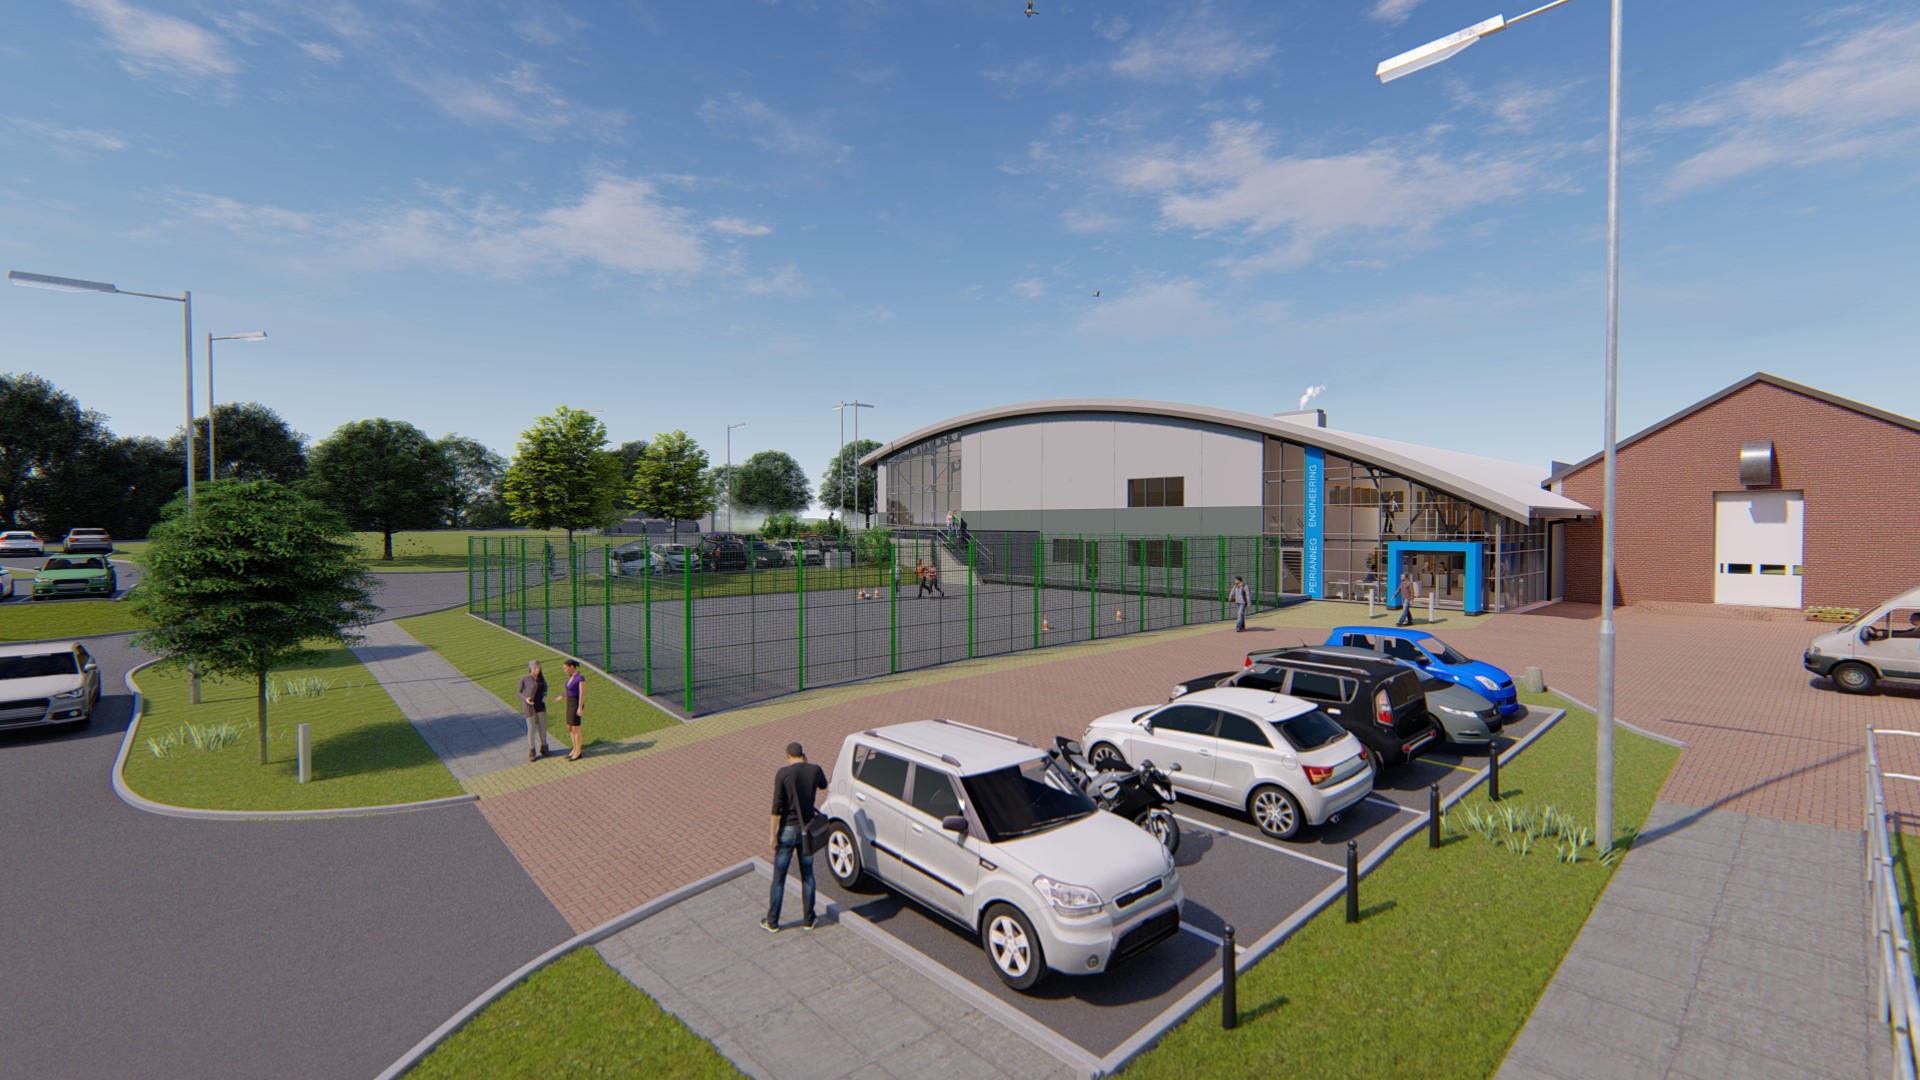 3D Visualisation of the Engineering Extension